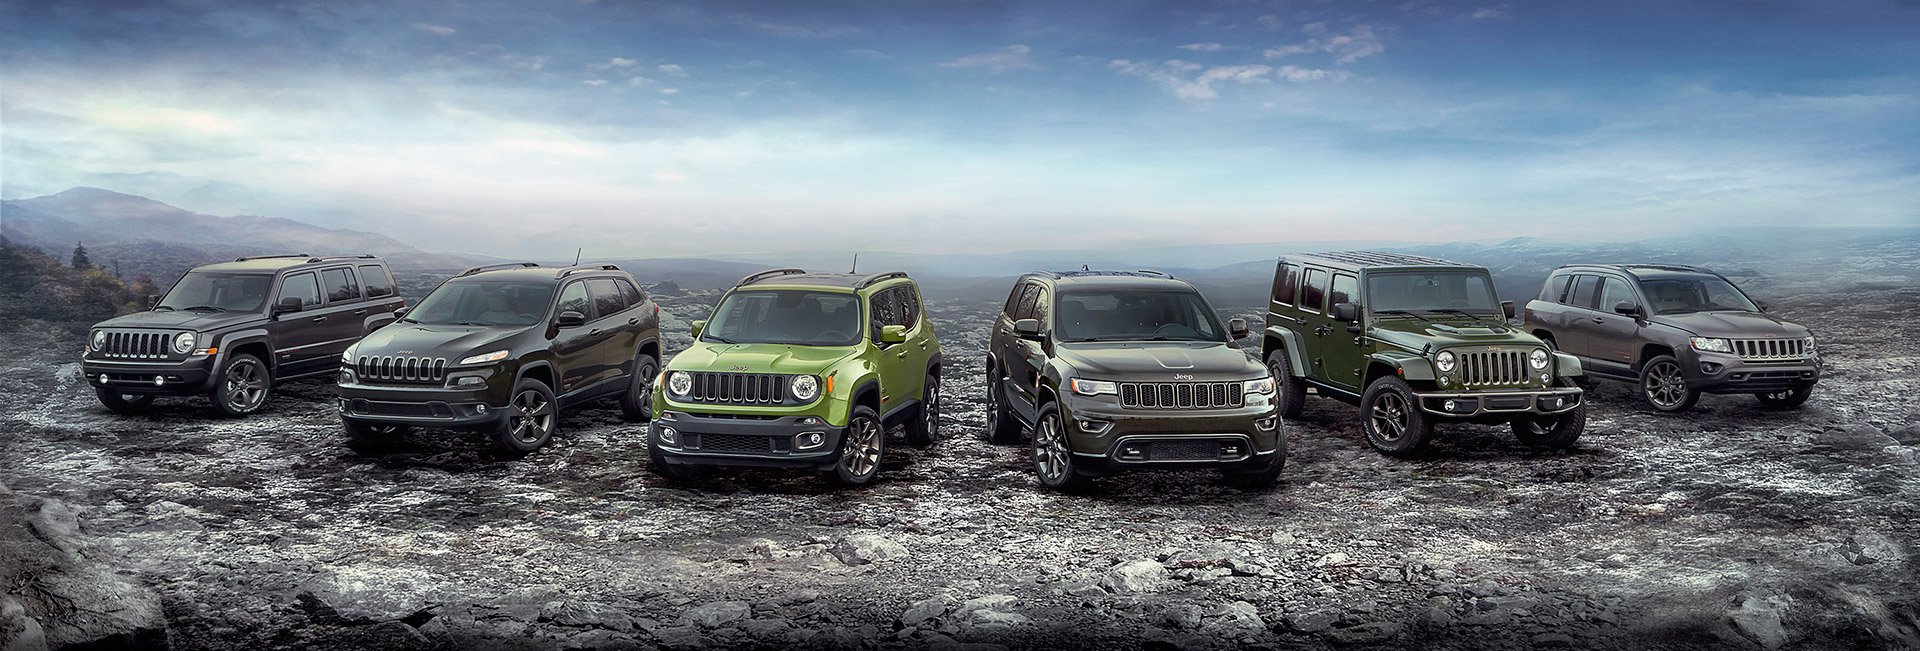 Jeep Celebrates 75th Anniversary with Special Editions